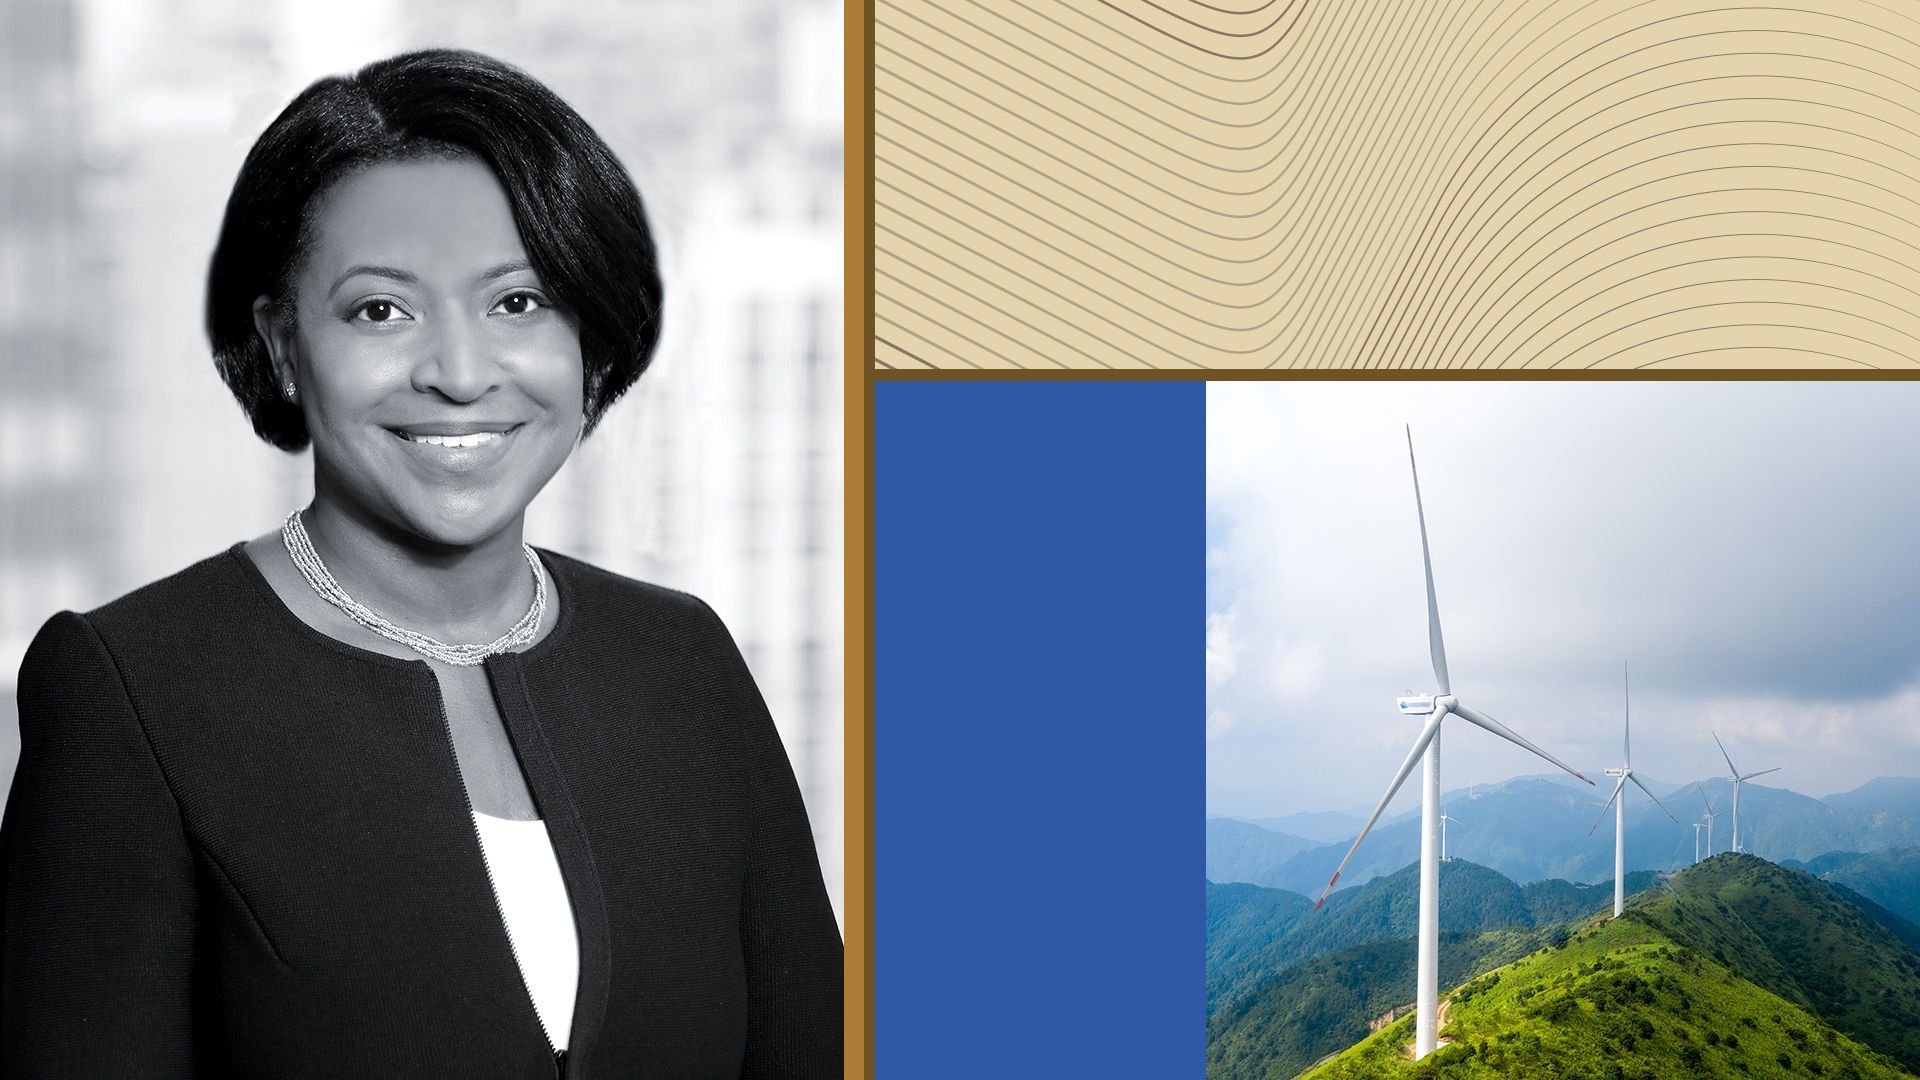 Photo illustration of Tanya Barnes surrounded by abstract shapes and photos of renewable energy. 